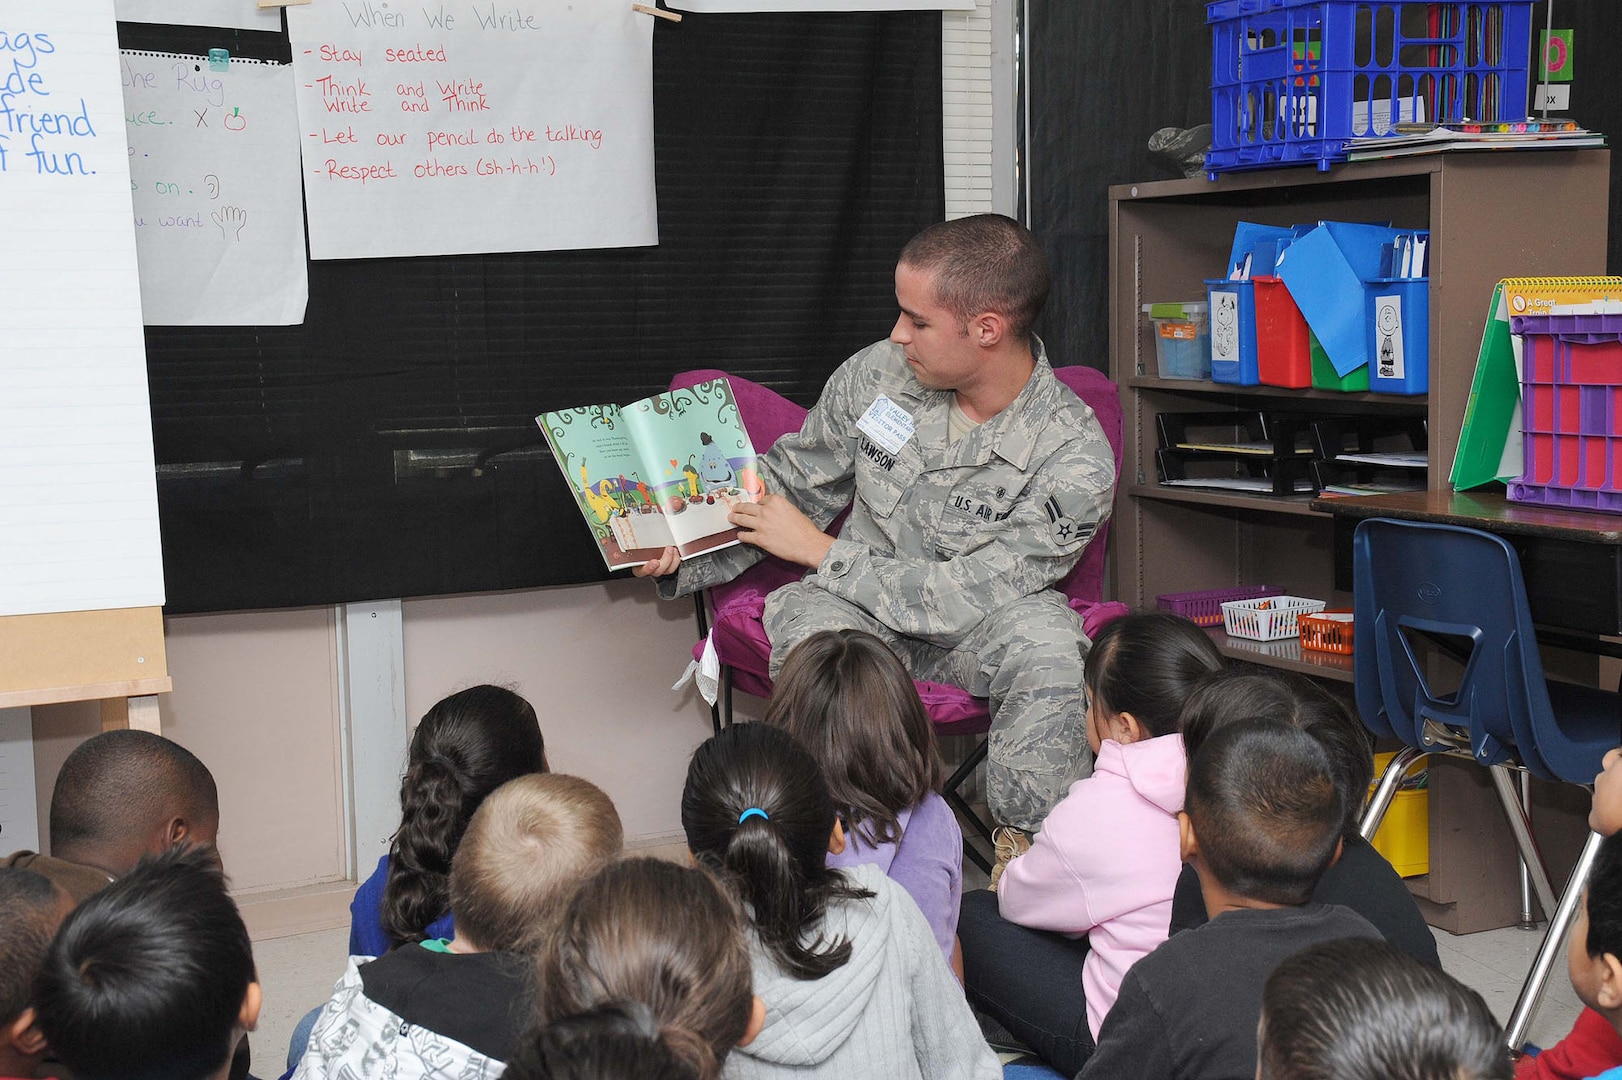 Airman 1st Class Curtis Lawson, 59th Radiology Squadron, reads a story to children at Valley Hi Elementary Oct. 7. Airman Lawson was among 65 Joint Base San Antonio members, including servicemembers and civilians, who participated in the quarterly program to read to children in schools surrounding JBSA installations. (U.S. Air Force photo/Alan Boedeker)